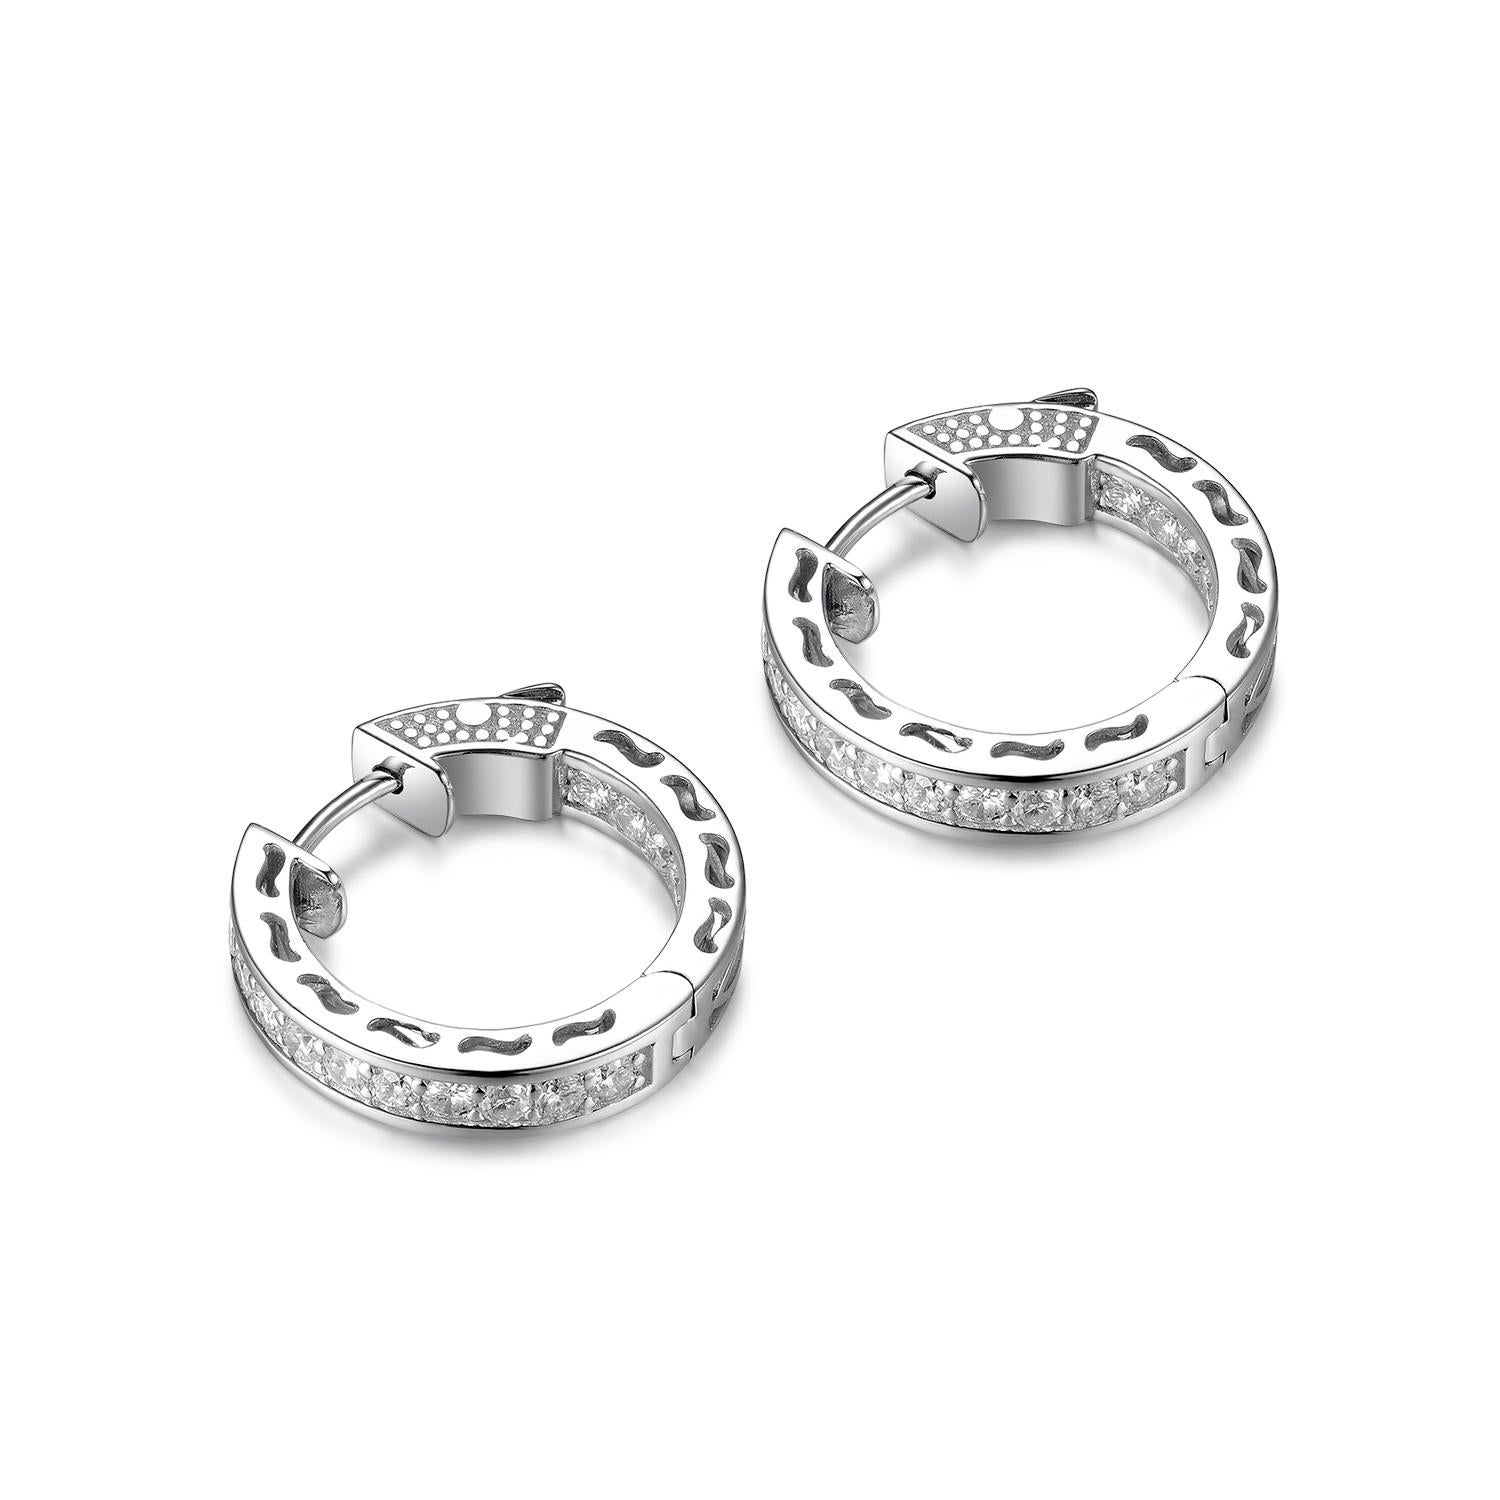 This hoop earrings feature 1.05 carats of round brilliance diamond set in 18 karat white gold. Great for everyday use. Rose gold and yellow gold are also available, please see storefront for other colors.

Diameter: 0.72 inch
Width: 0.14 inch
18K